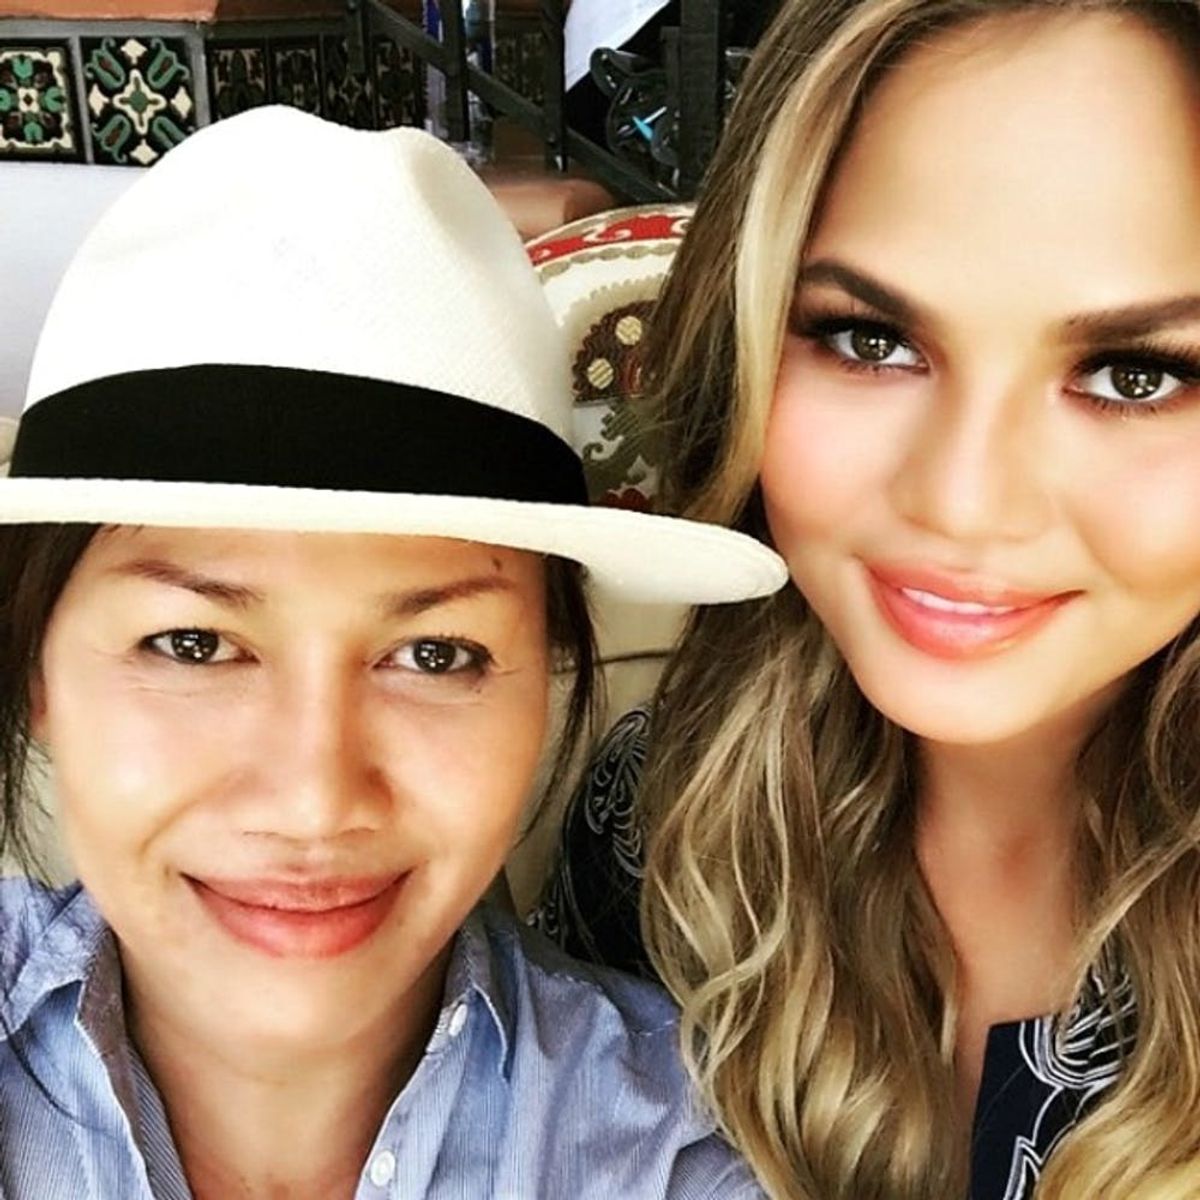 6 Reasons Why Chrissy Teigen and Her Mom Give Us Serious #RelationshipGoals